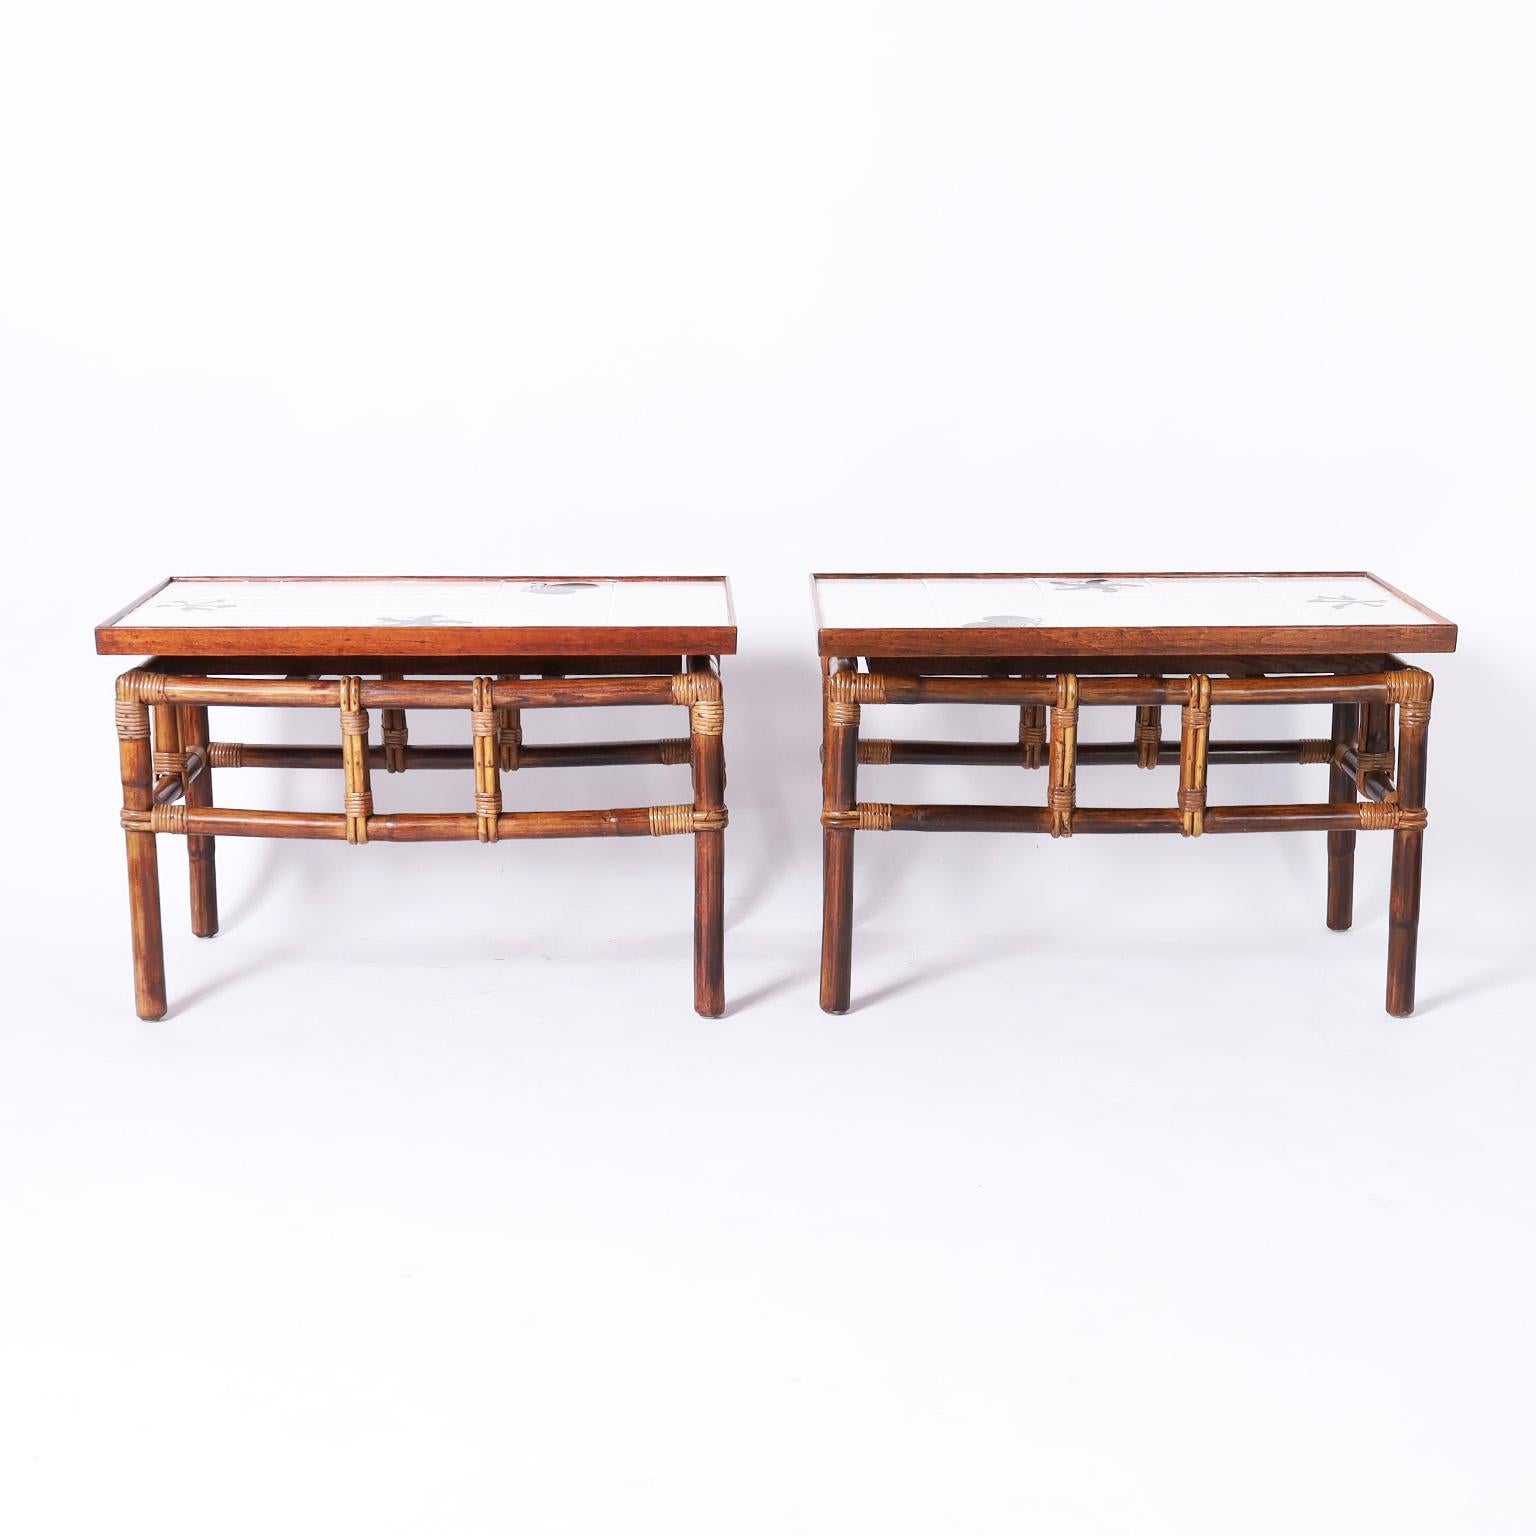 Chic pair of mid century tables or stands designed by John Wisner for Ficks Reed in a Japanese form with tiles on top over bamboo bases with reed wrapped joints.